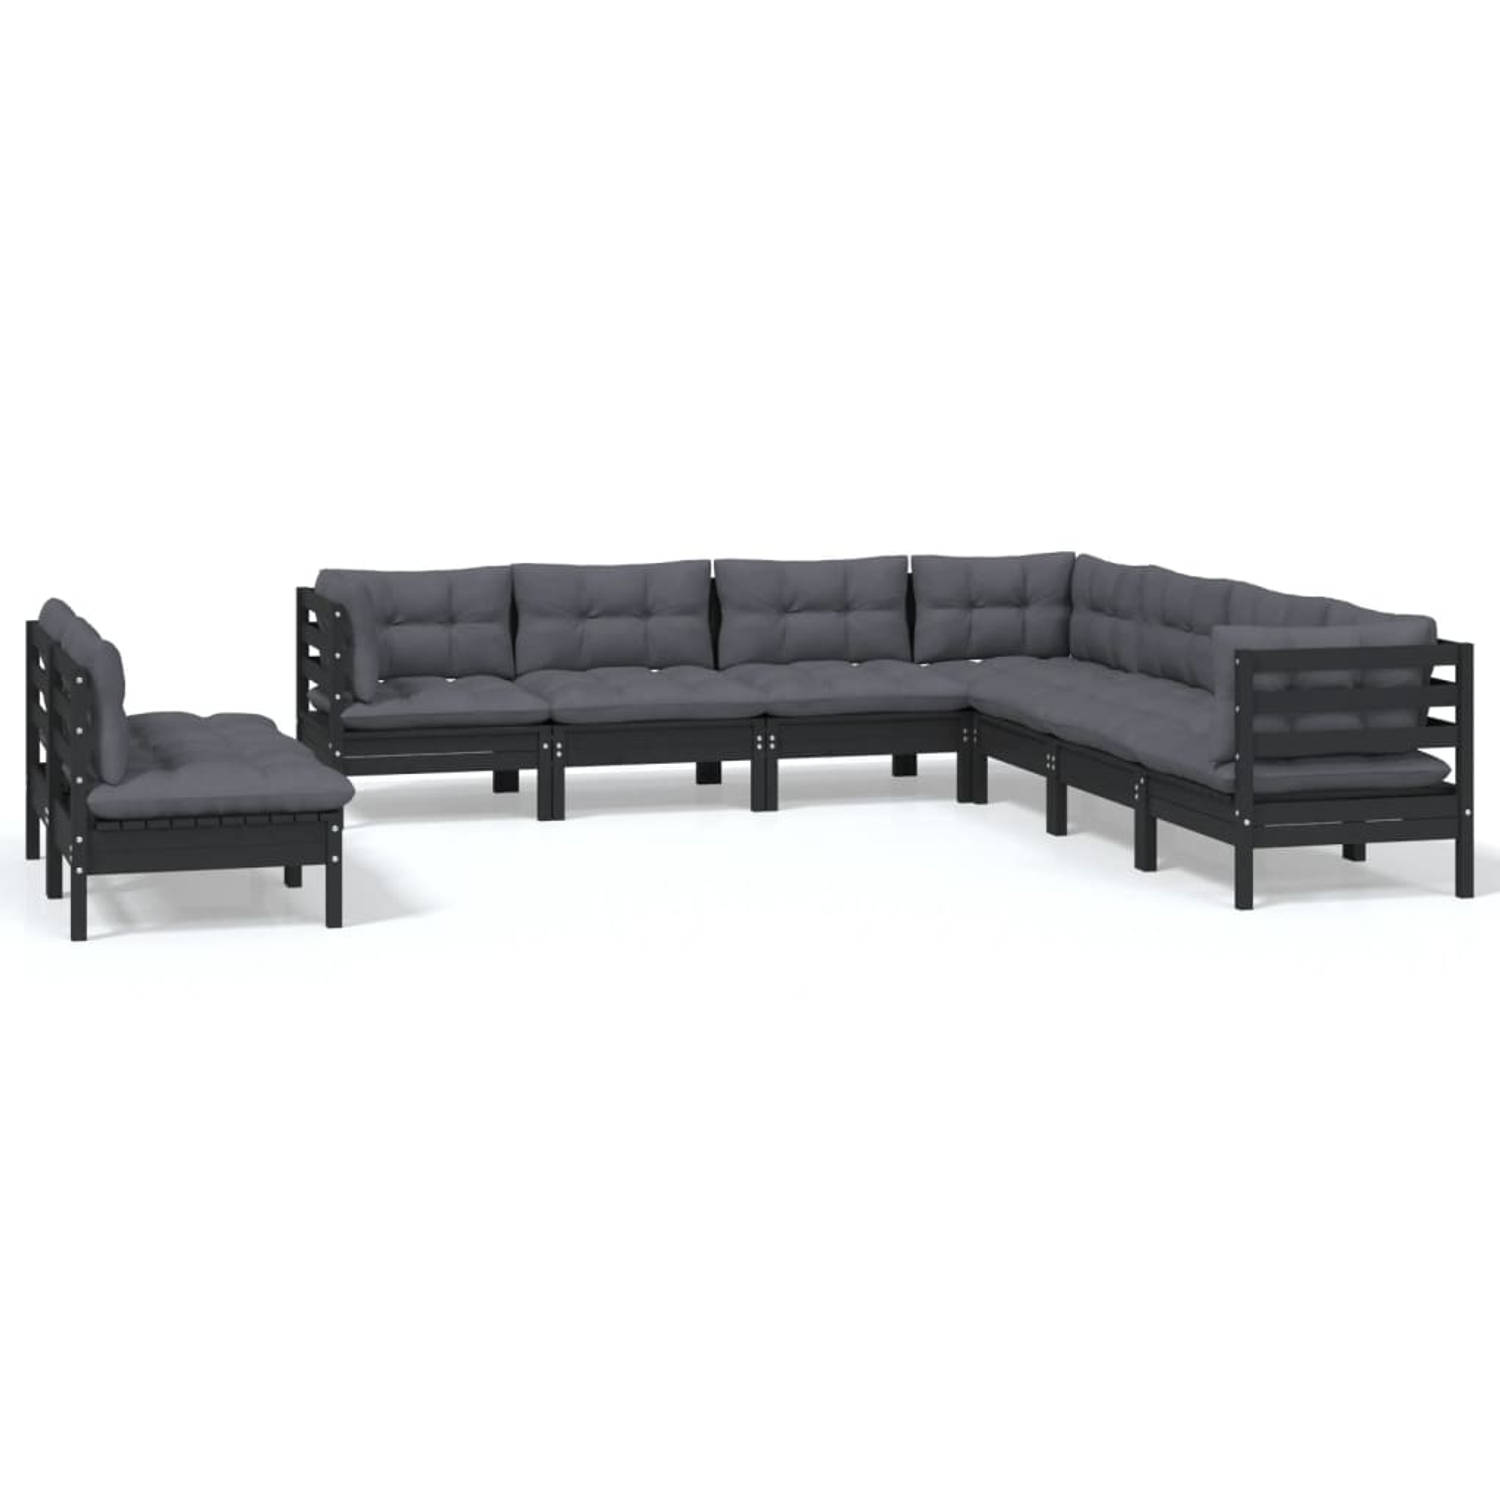 The Living Store Tuinset Grenenhout - Loungeset 63.5x63.5x62.5 cm - Zwart - Antraciet